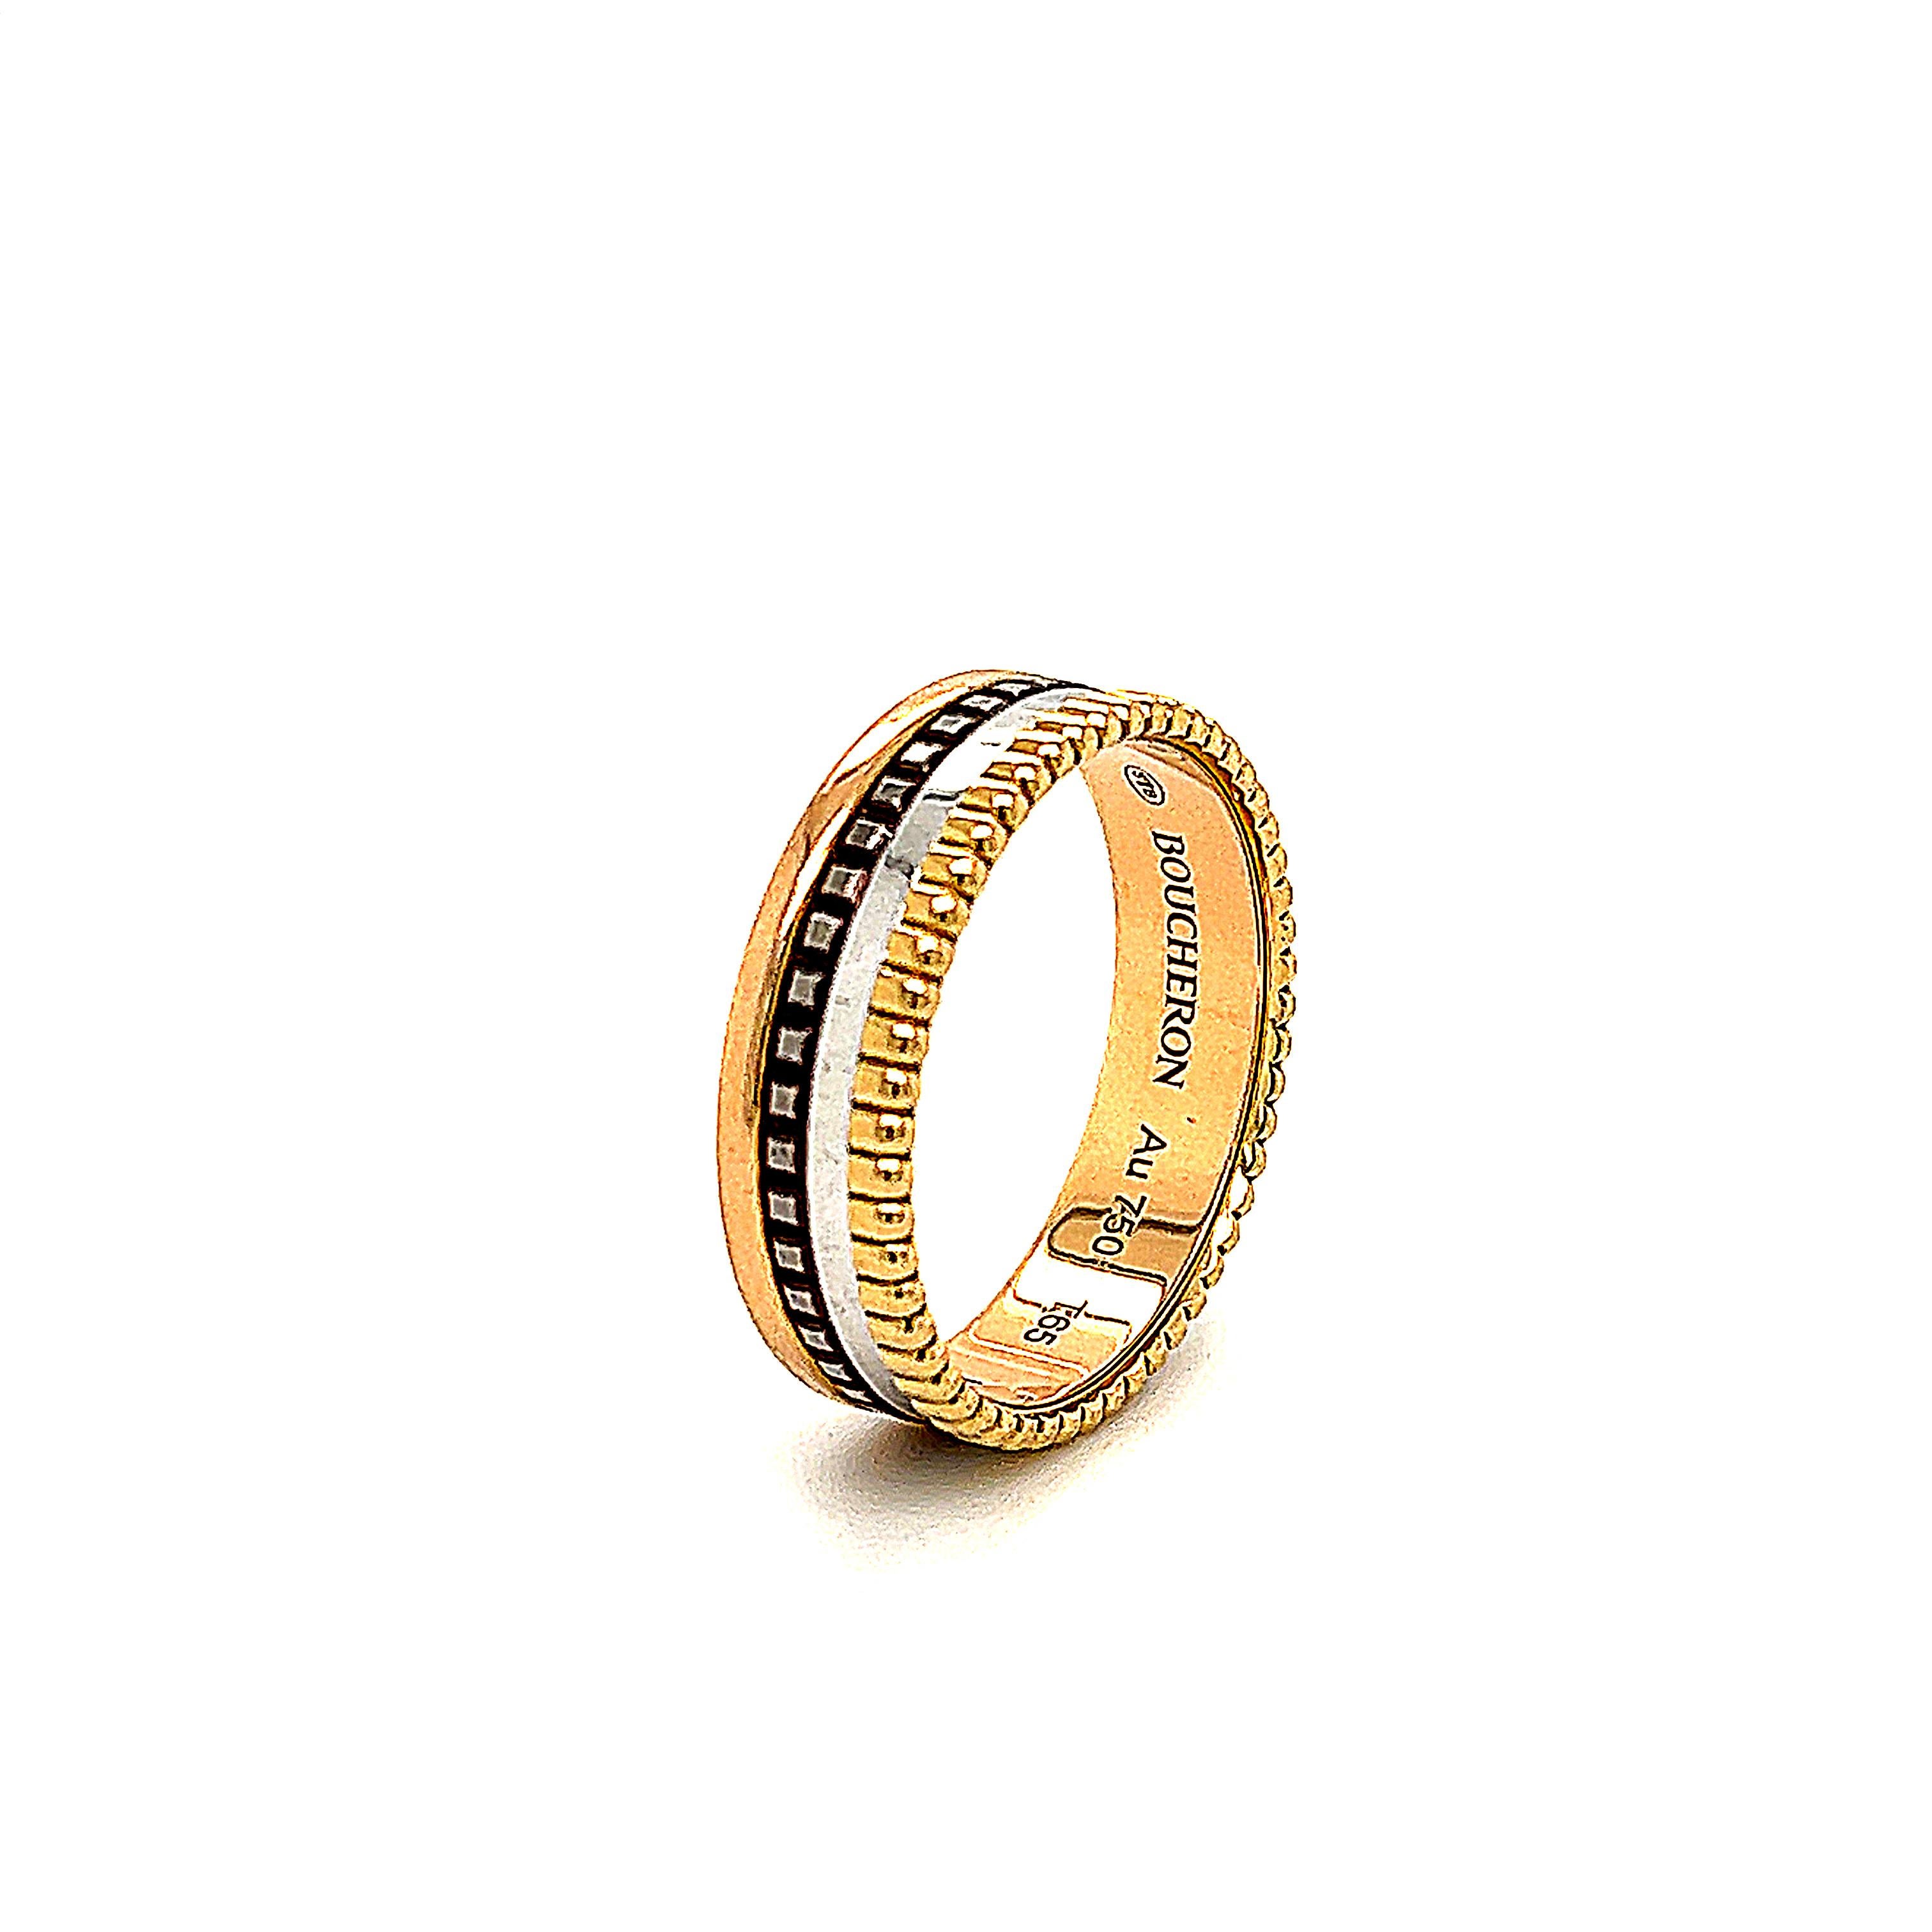 A glittering tribute to Paris, the city of light. The Boucheron small classic quatre band ring expresses unexcelled craftsmanship with four shades of gold in four different patterns.
The ring is crafted in 18 karat pink, white, and yellow gold with